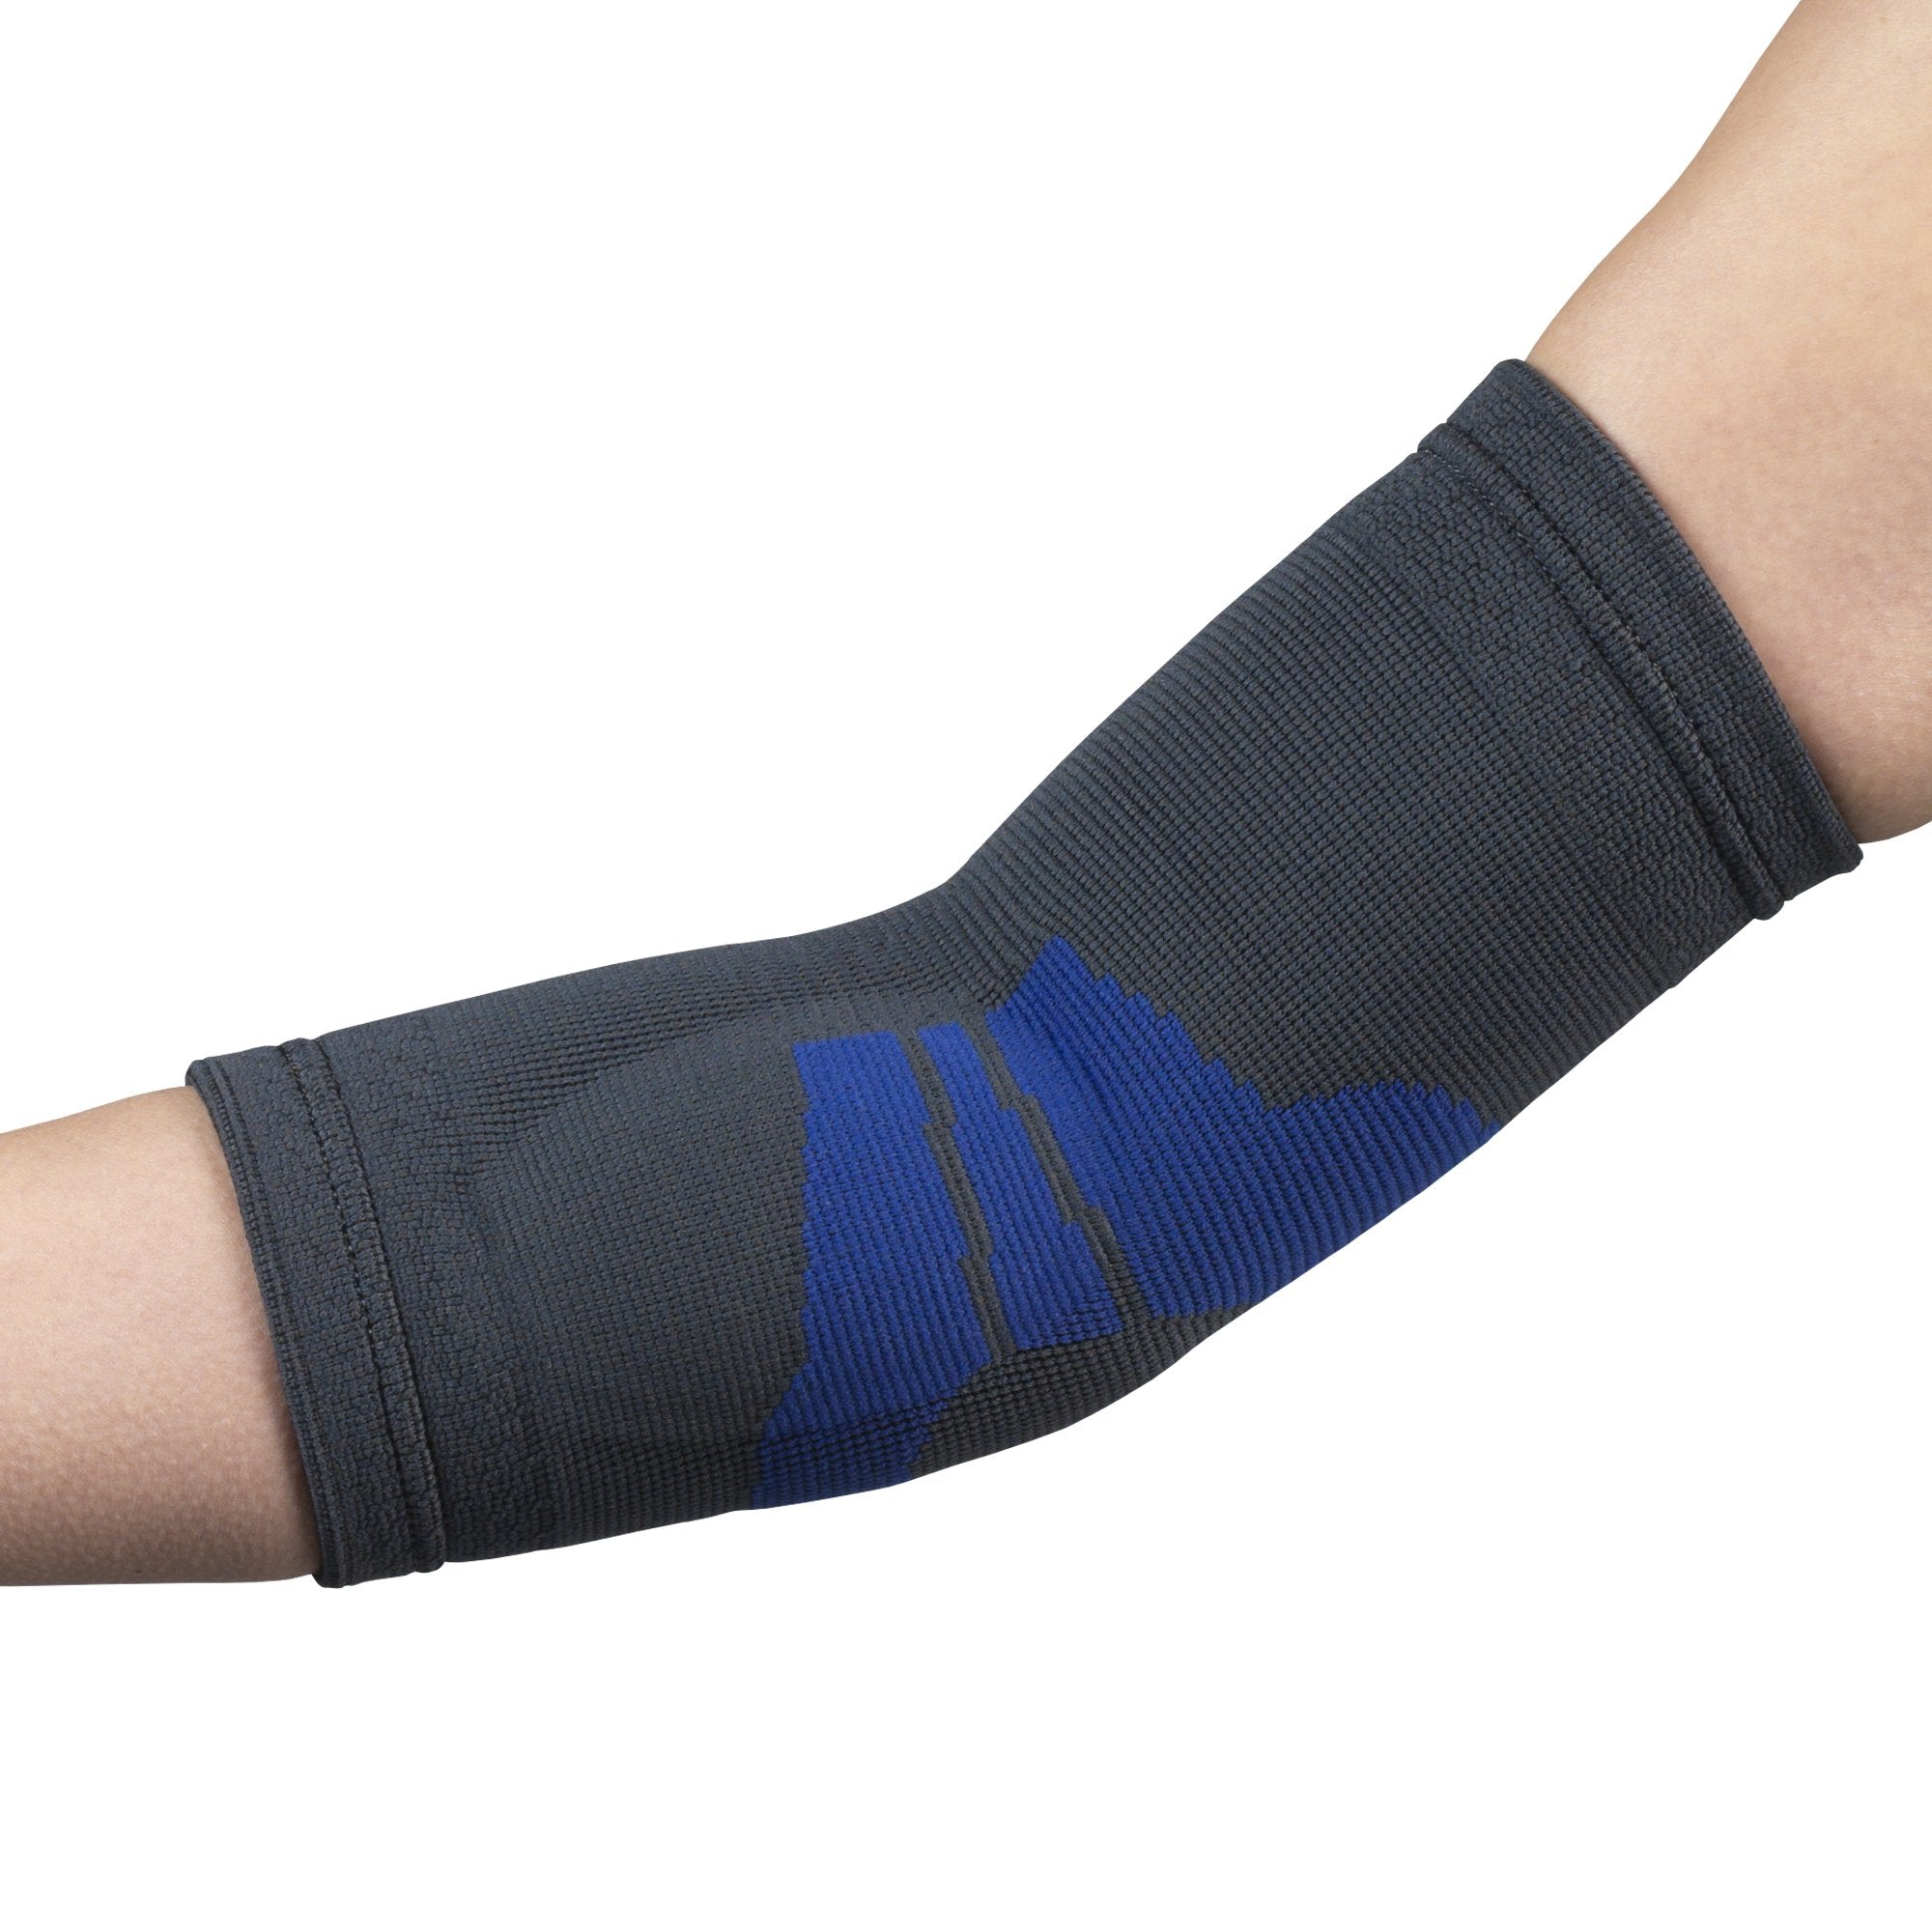 AIR 2439-XL EA/1 OTC ELASTIC ELBOW SUPPORT WITH GEL INSERT X-LARGE(12.5-13.75") CHARCOAL